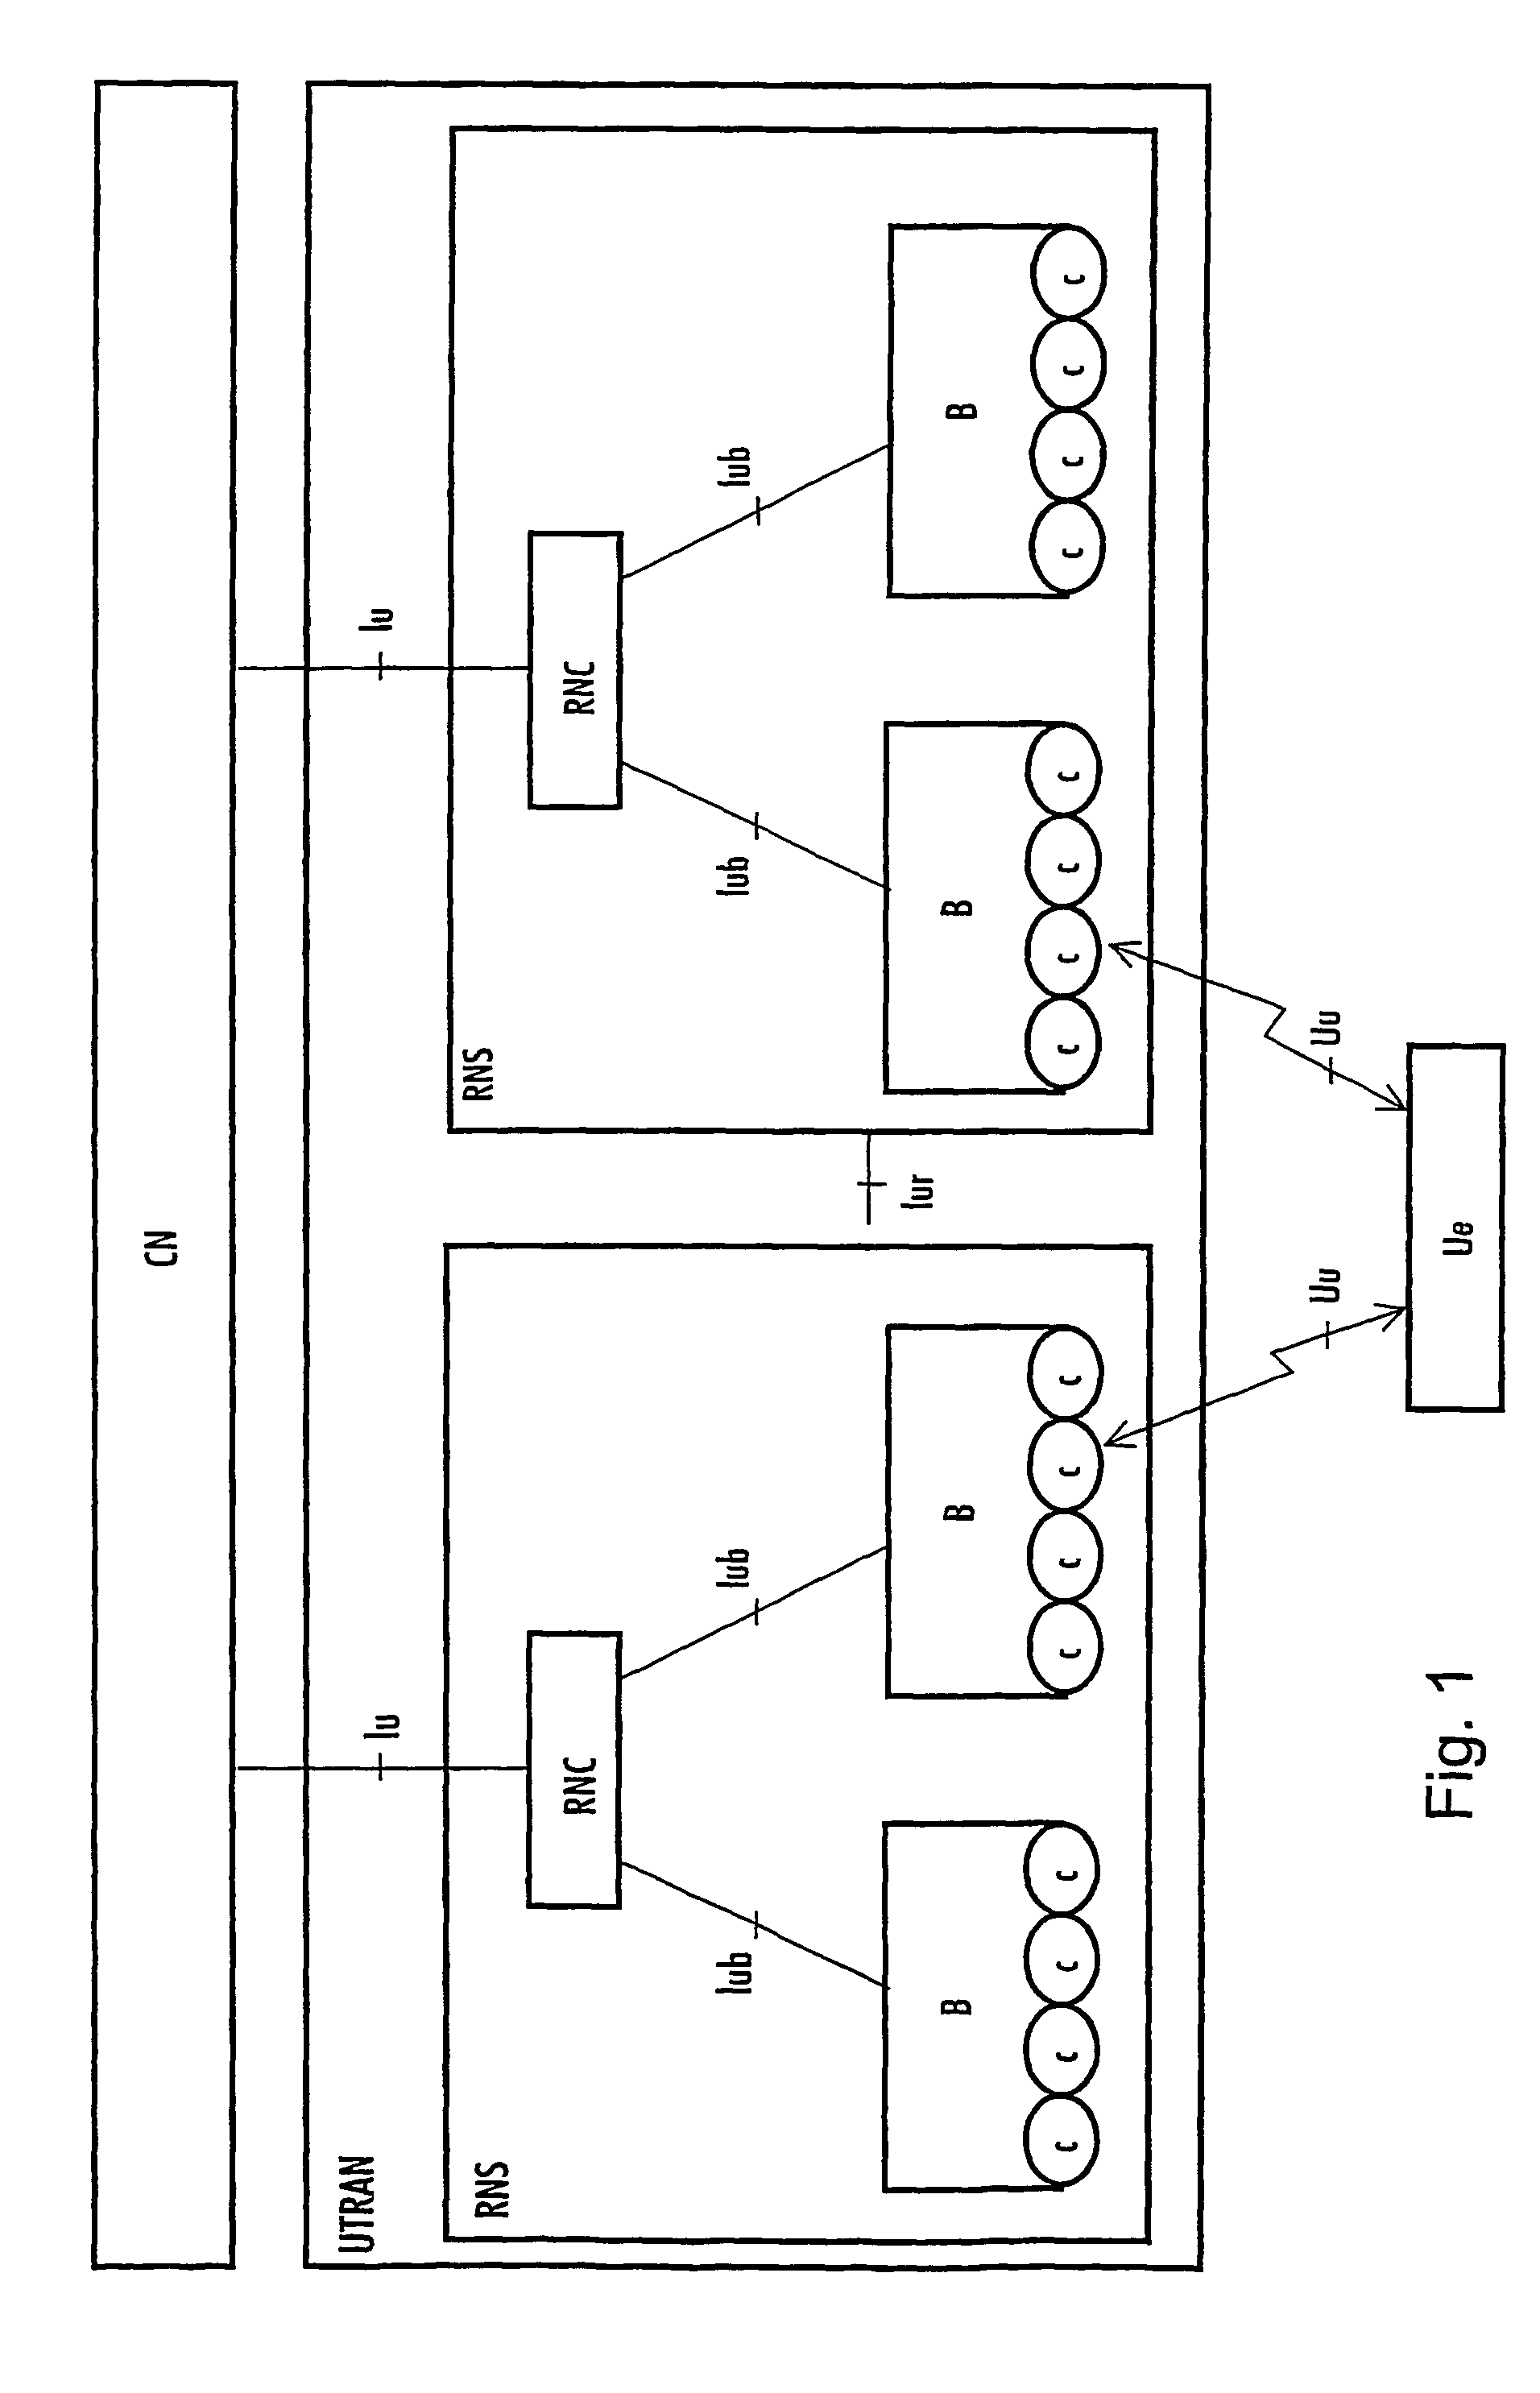 Method for limiting signal and transmitter